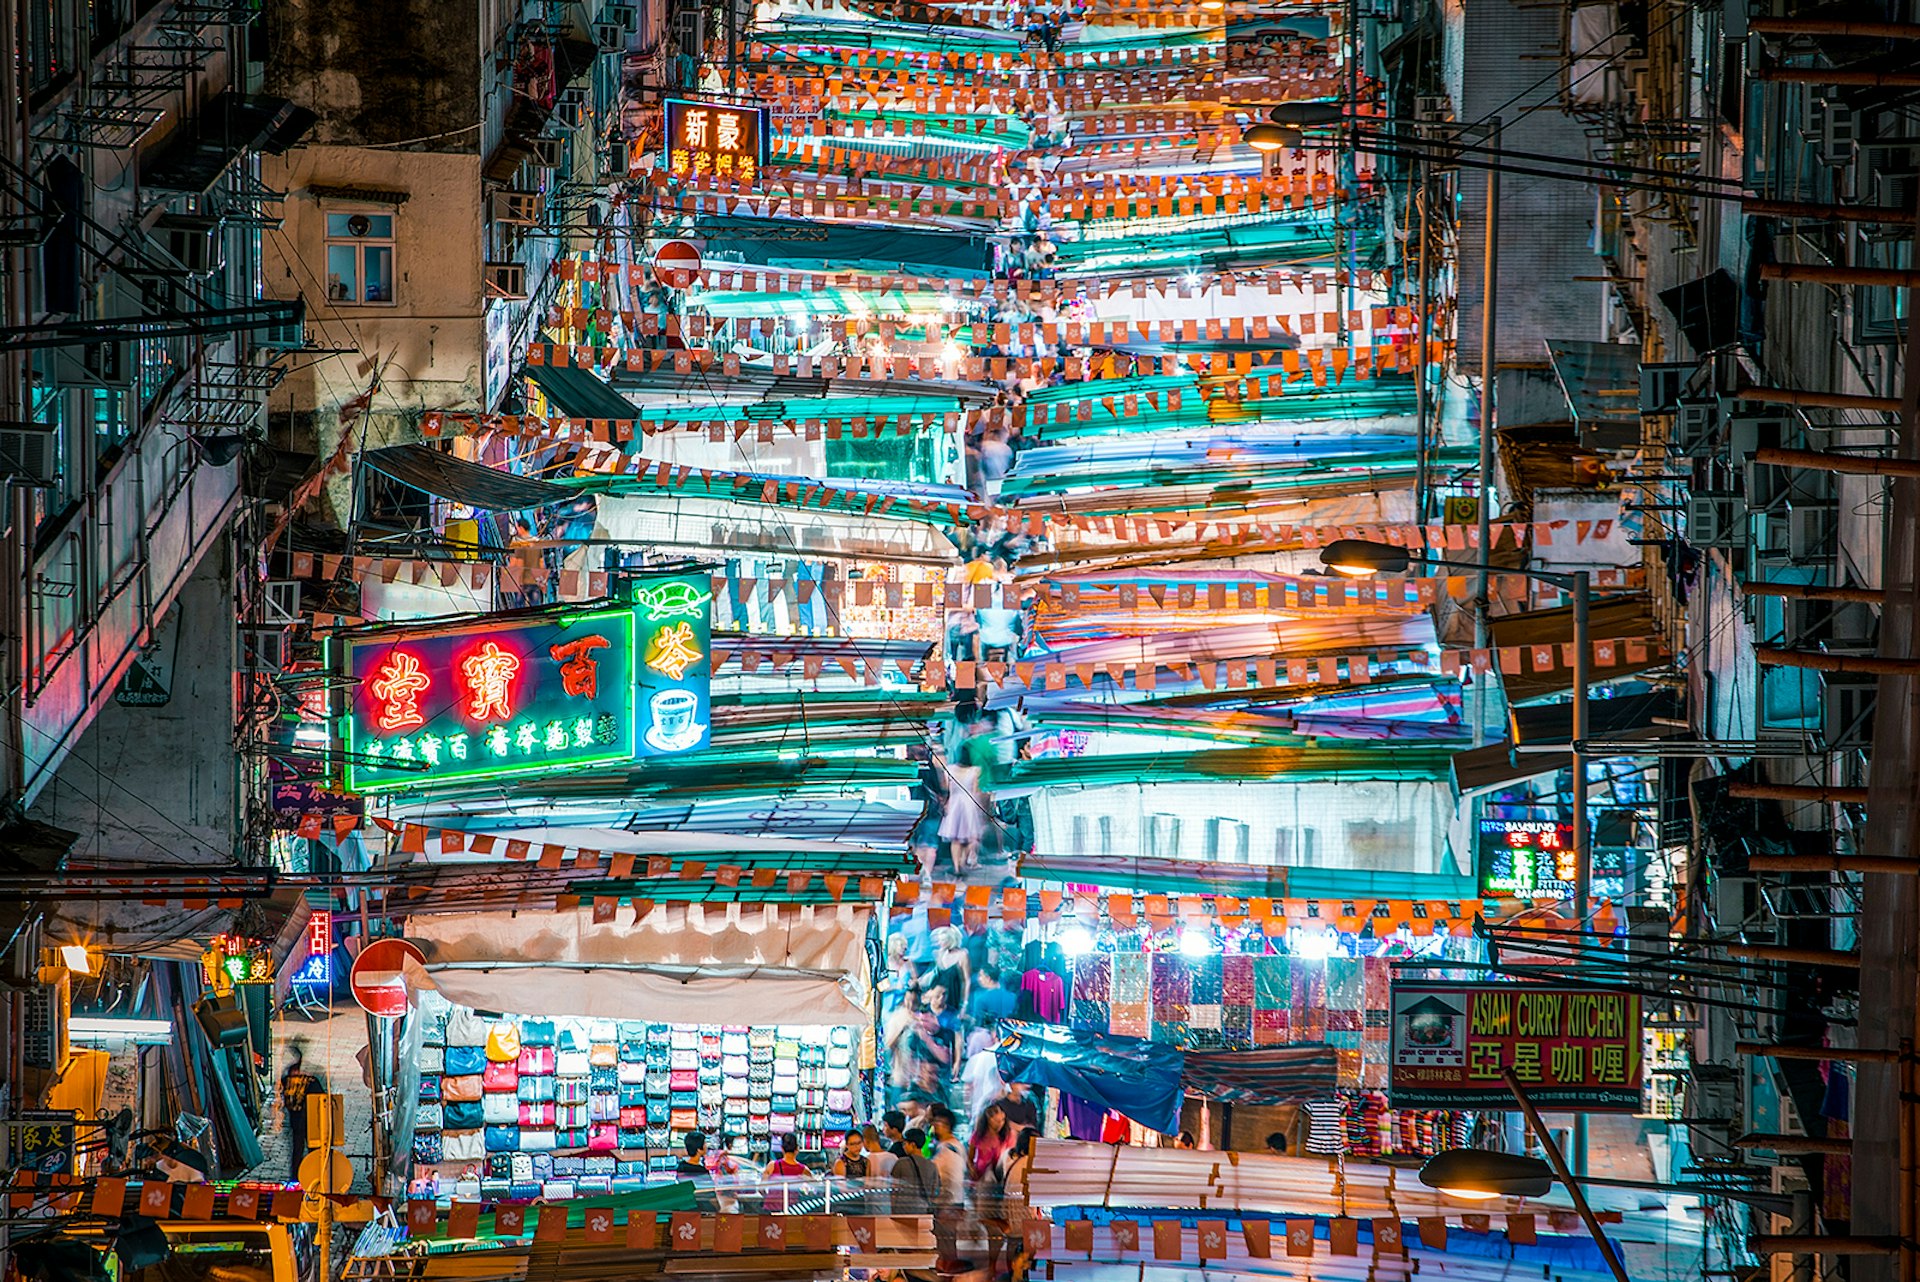 An overhead shot numerous brightly lit shopping stalls in a street market in Mong Kok, Hong Kong.